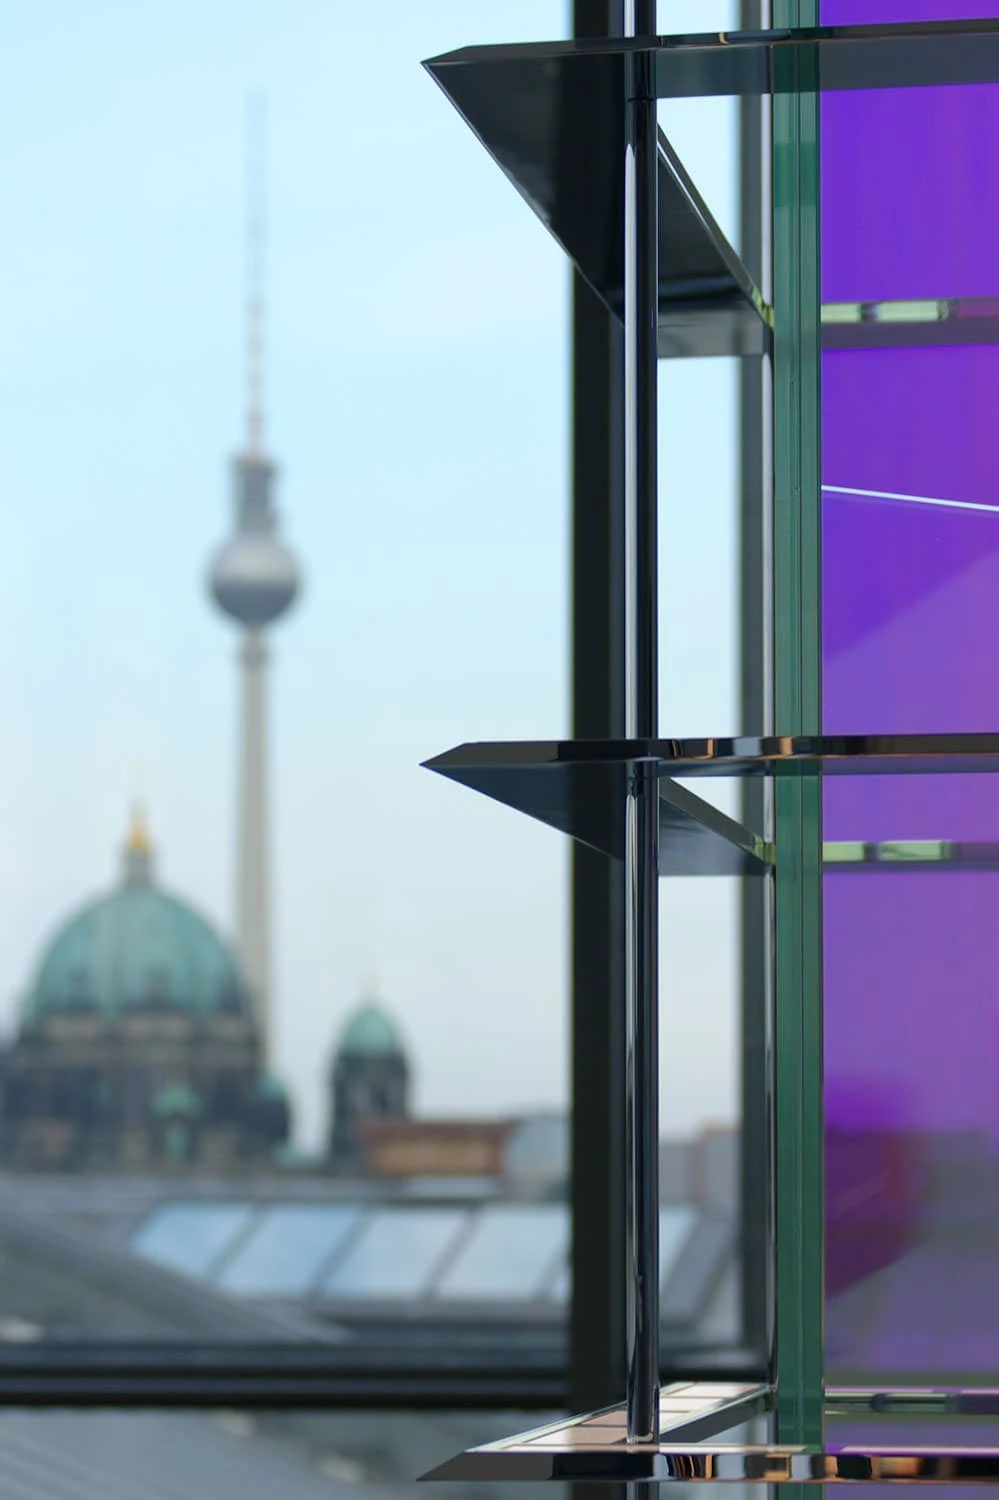 Detail of OLED luminaire and the television tower of Berlin in the background